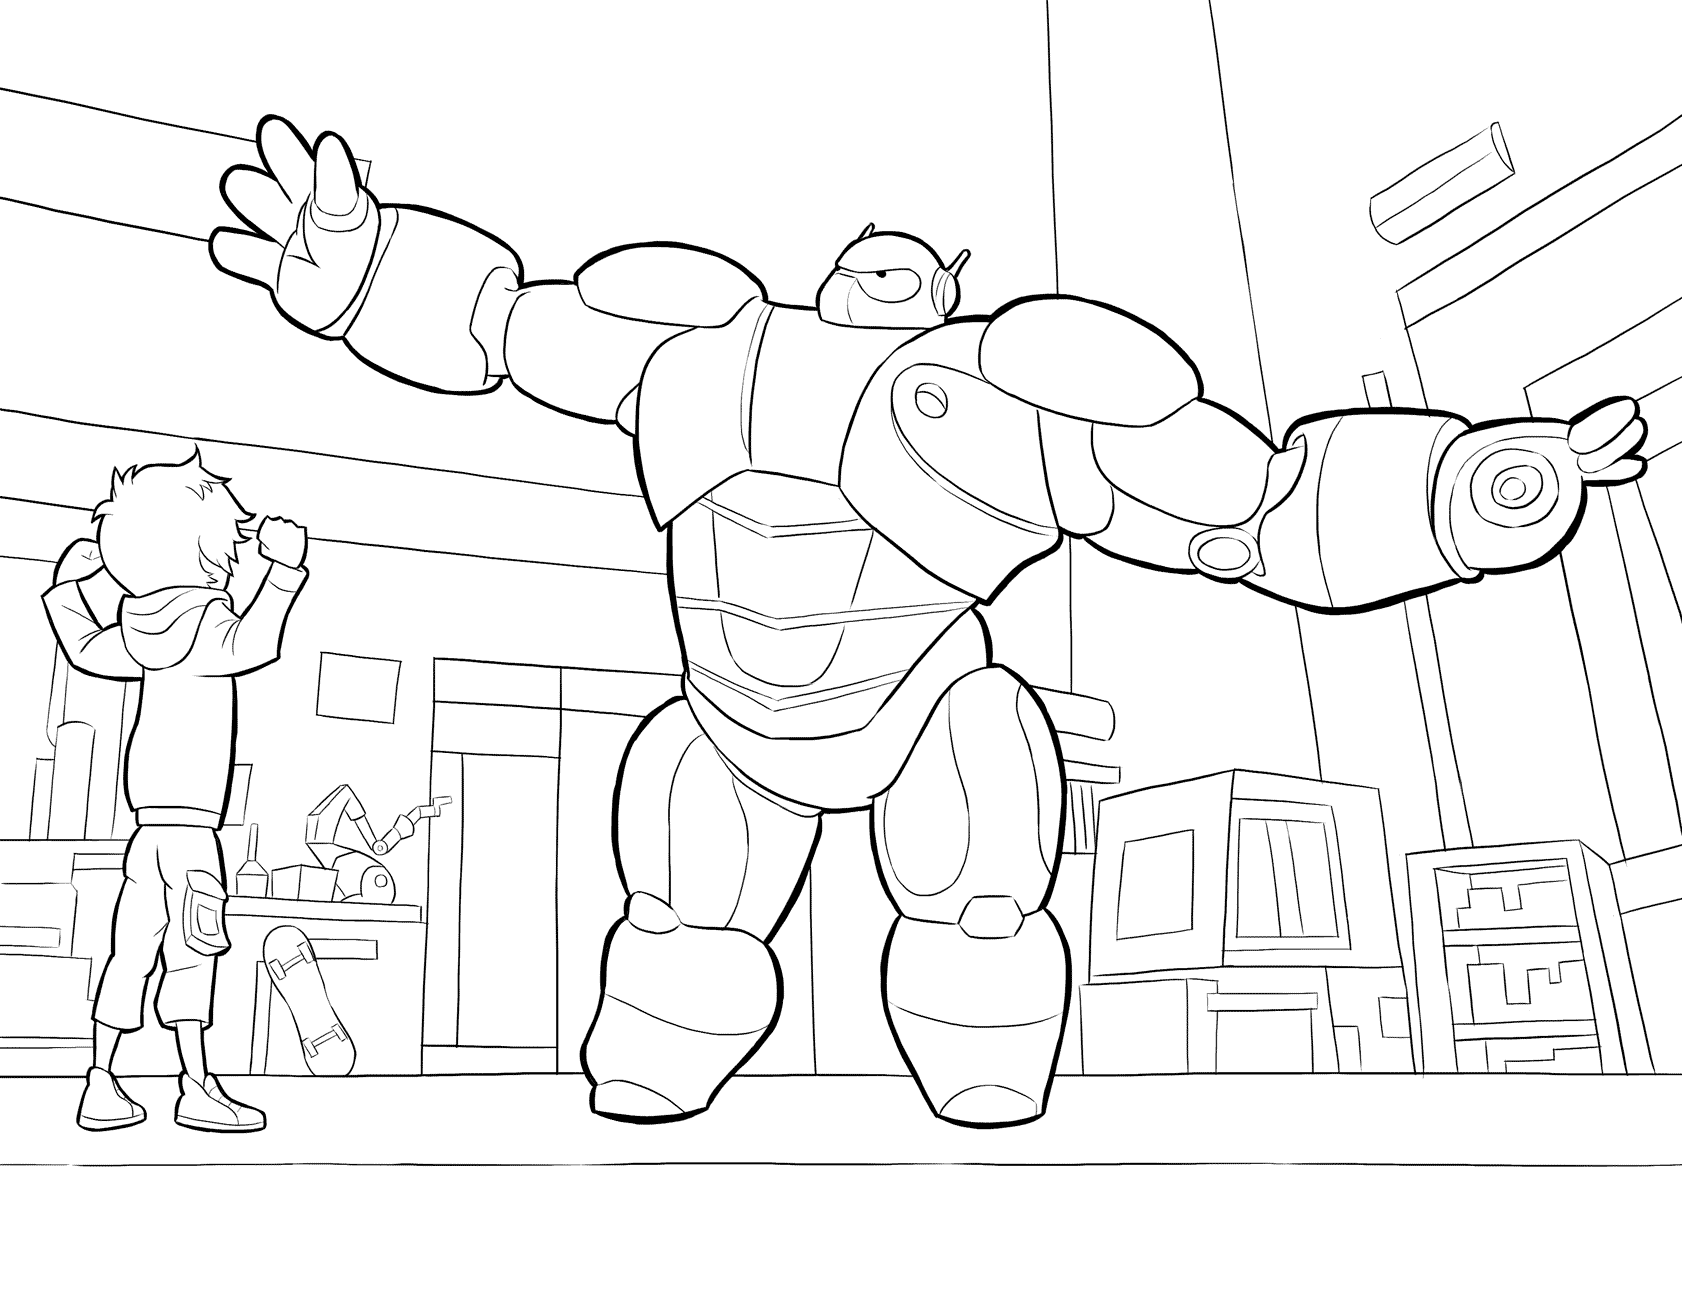 Coloring page - Baymax updated